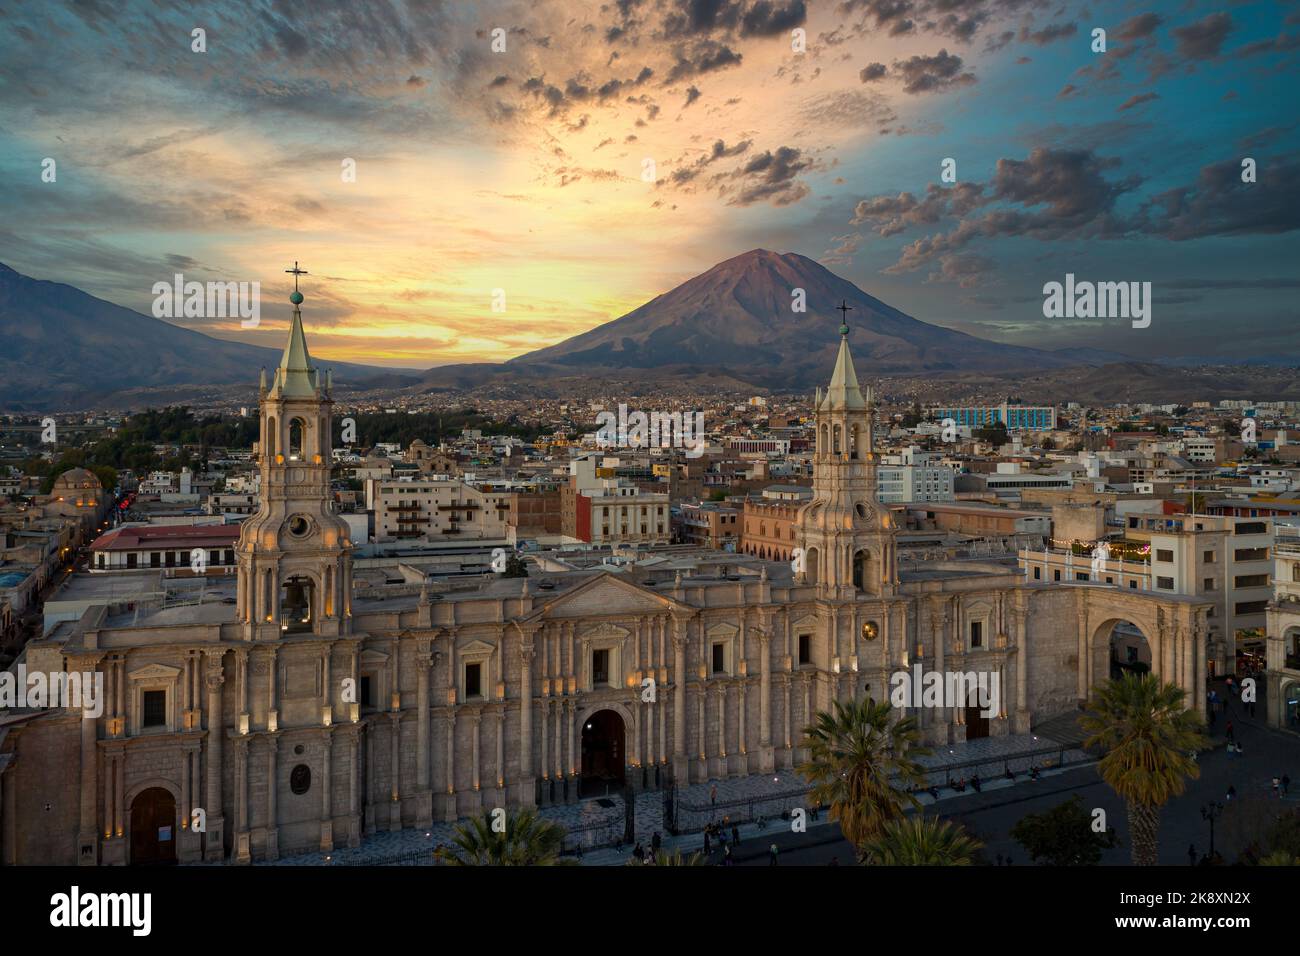 Aerial view of the Plaza de Armas with the Arequipa Cathedral and the Misti Volcano in the background in Arequipa, Peru at the blue hour/sunset. Stock Photo